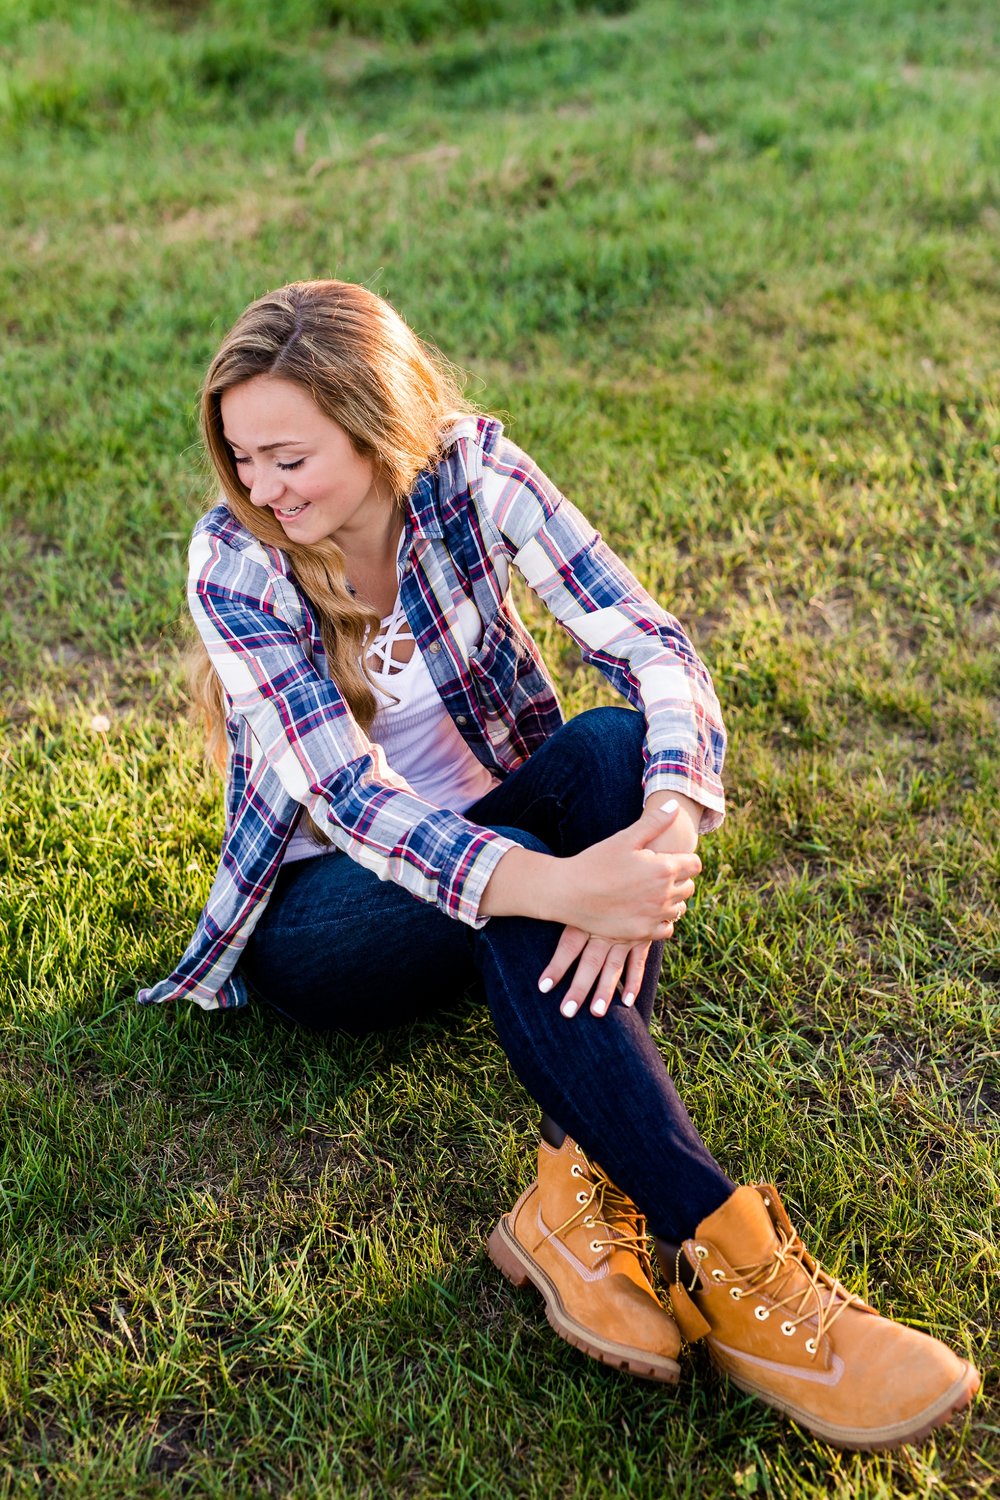 Country Styled High School Senior Pictures on a Farm and Little Cormorant Lake in Minnesota by Amber Langerud with Grass Background